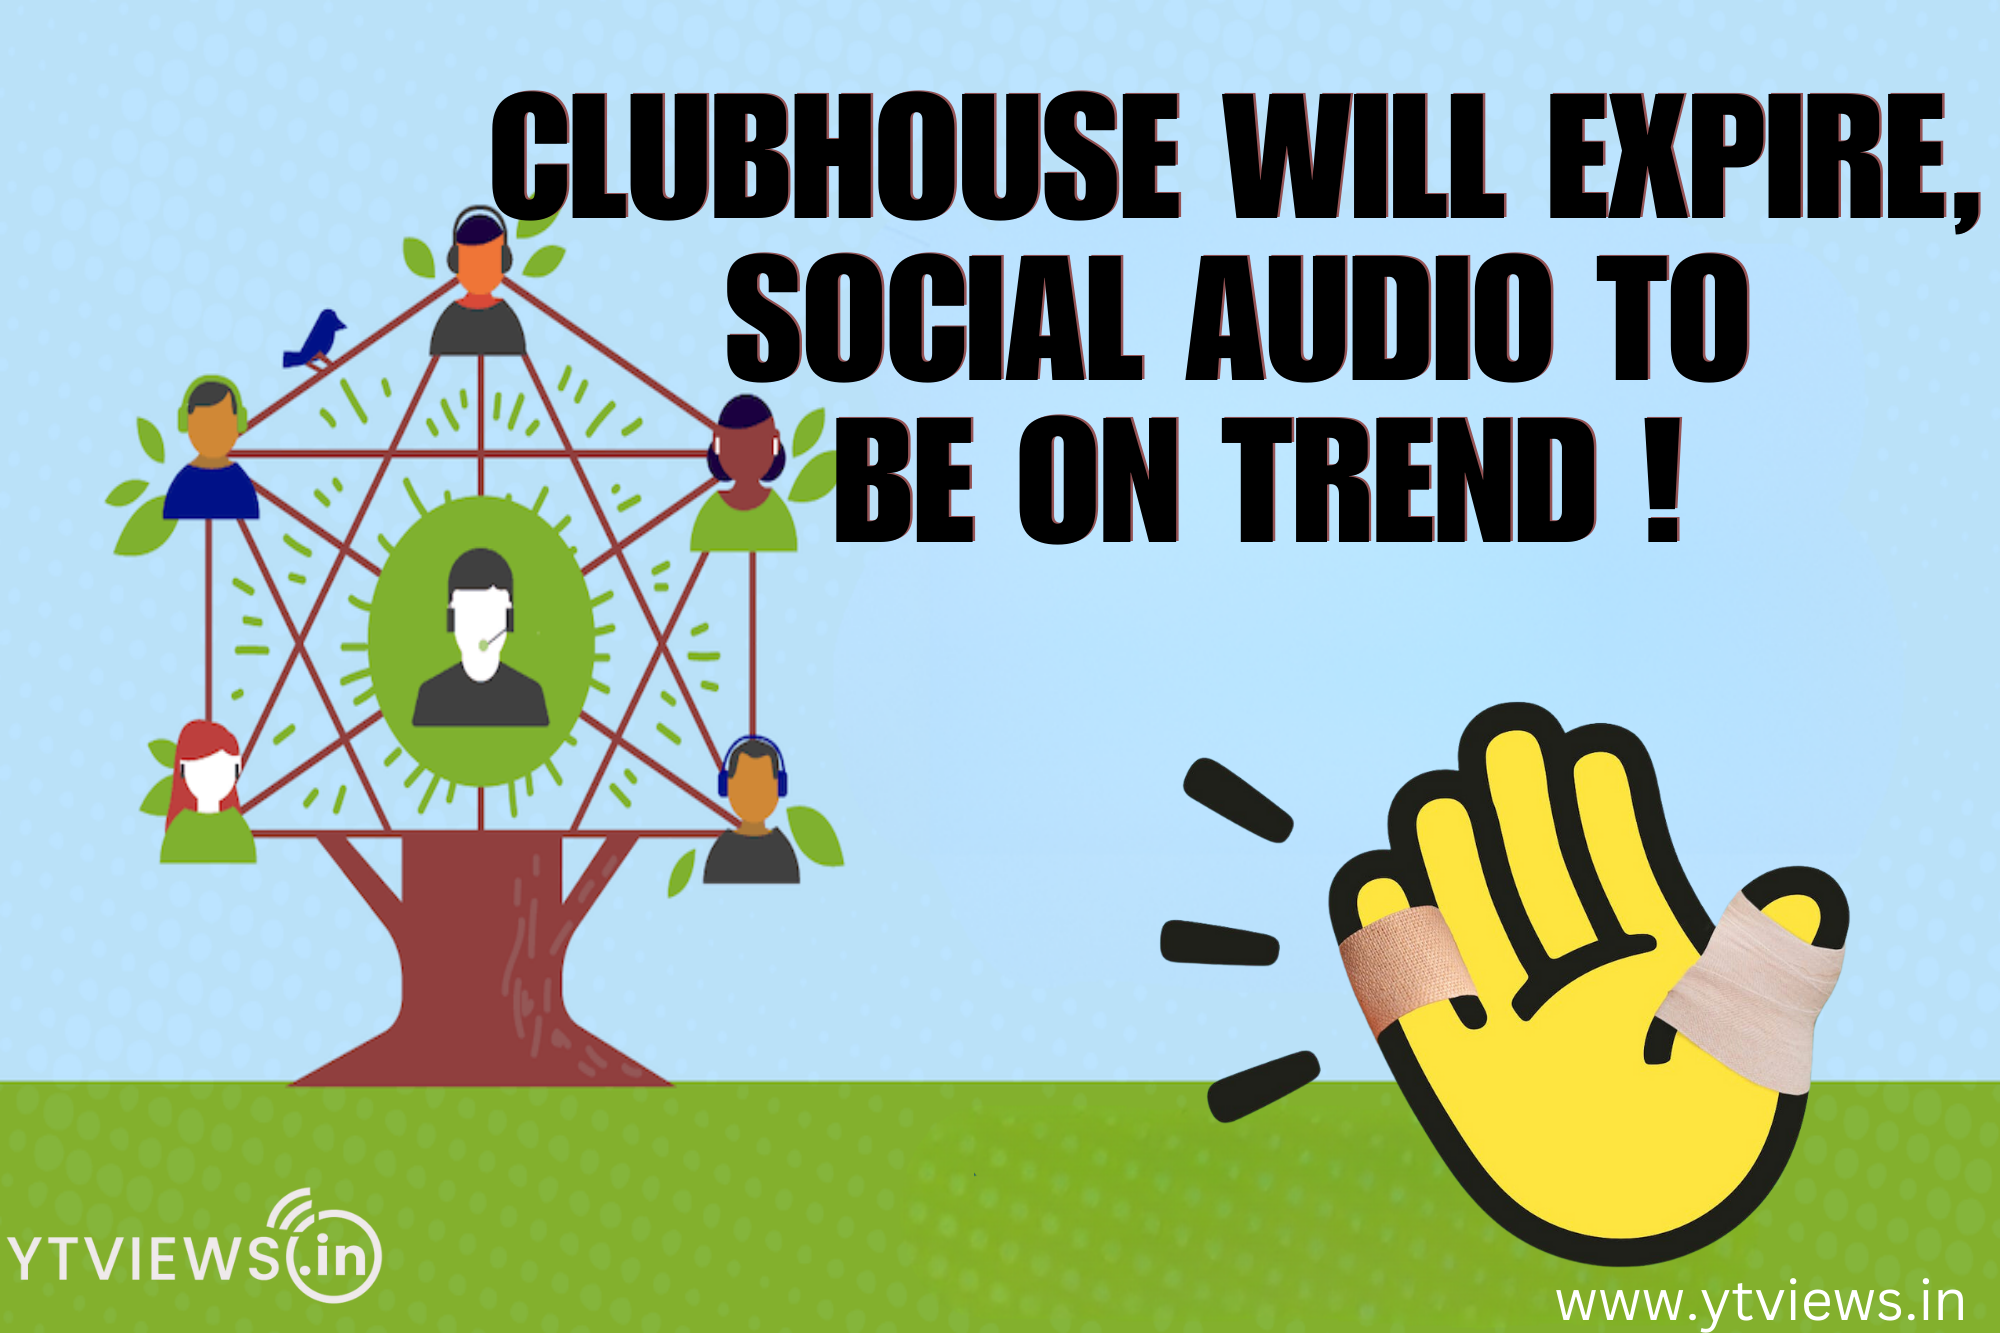 Clubhouse will expire, Social audio to be on trend